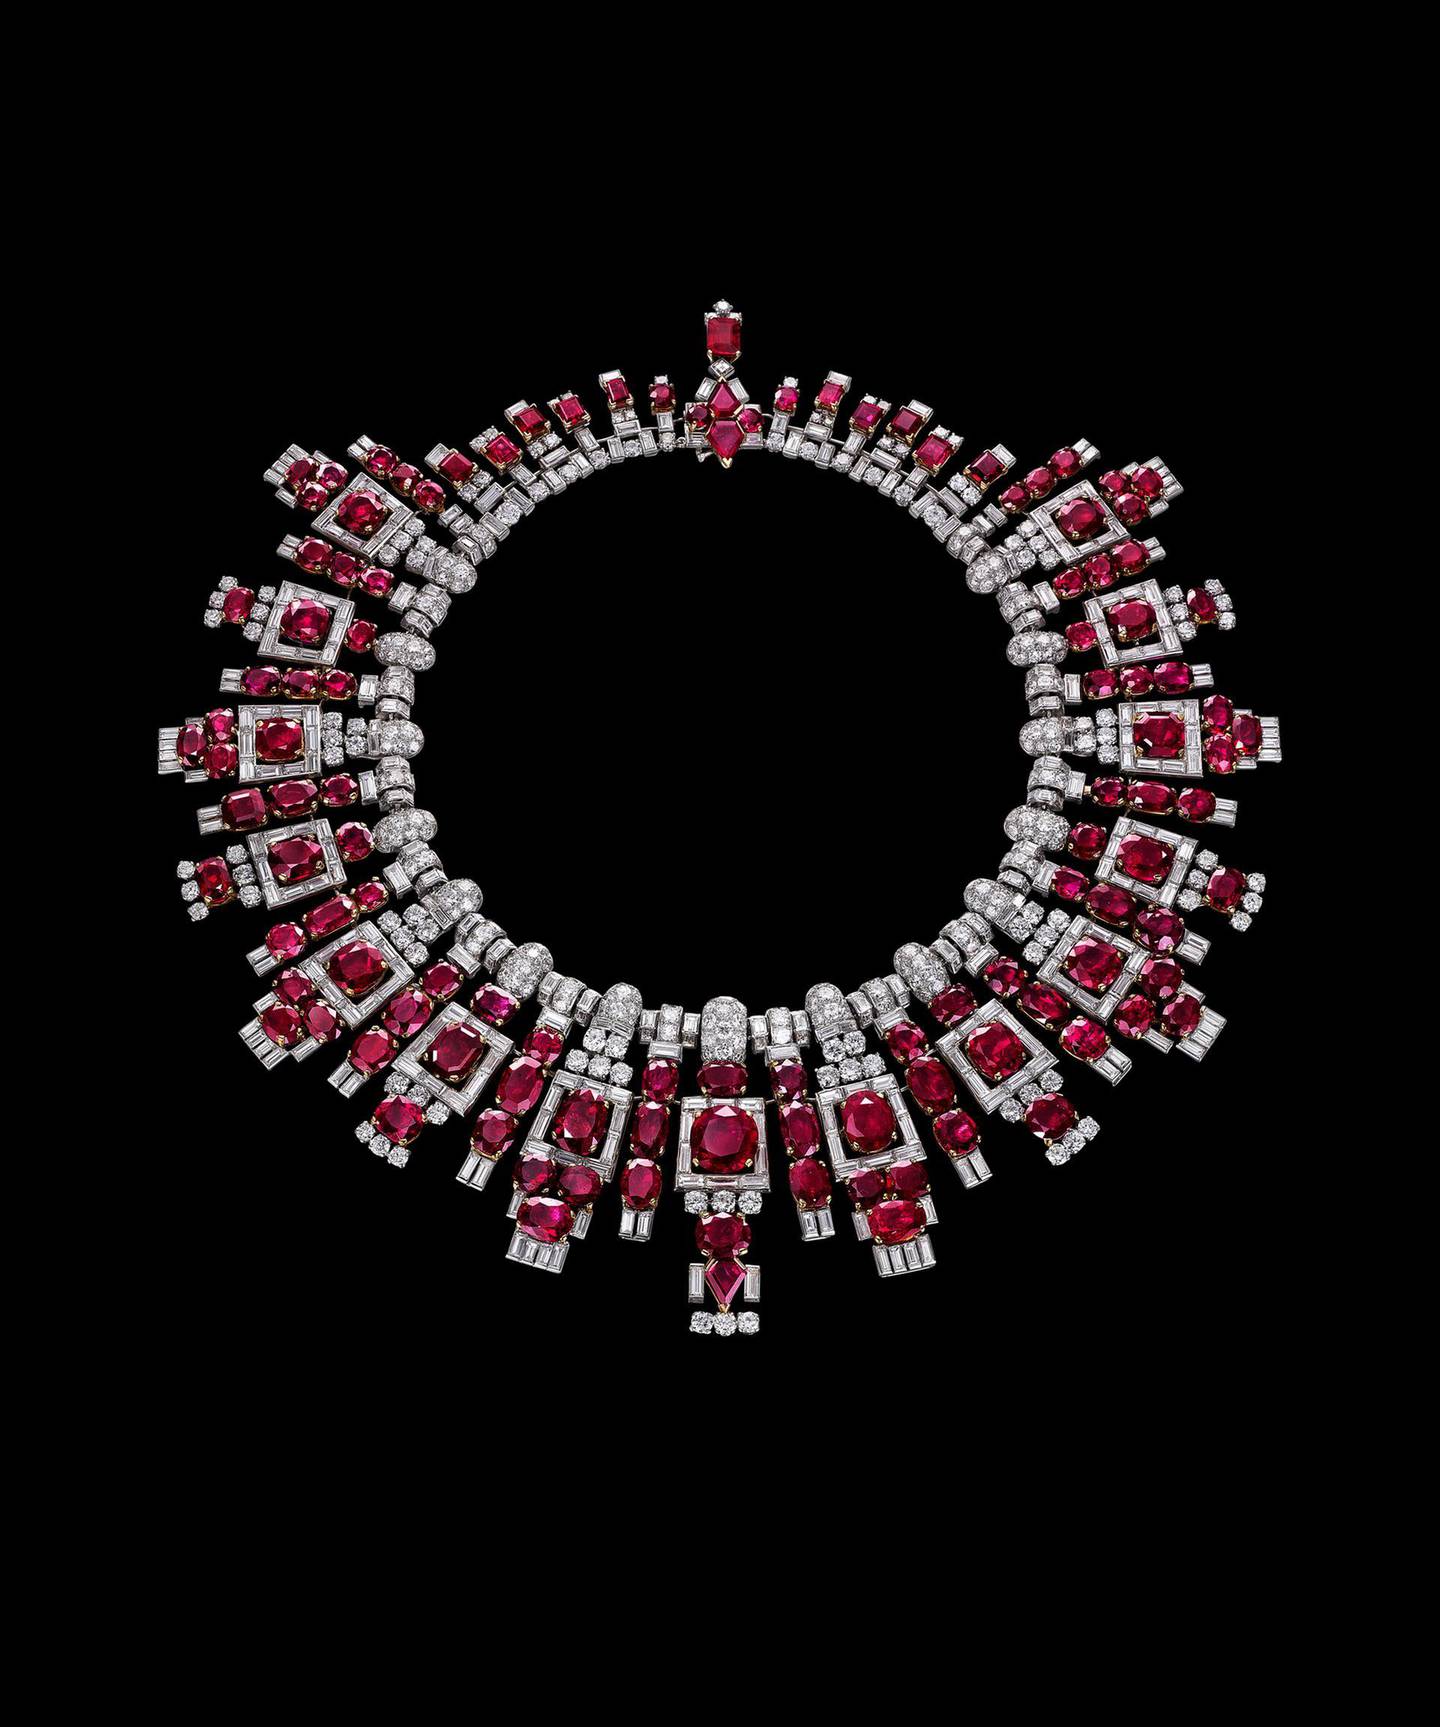 Ruby necklace from Cartier, which has boycotted trading in stones from Myanmar for the time being